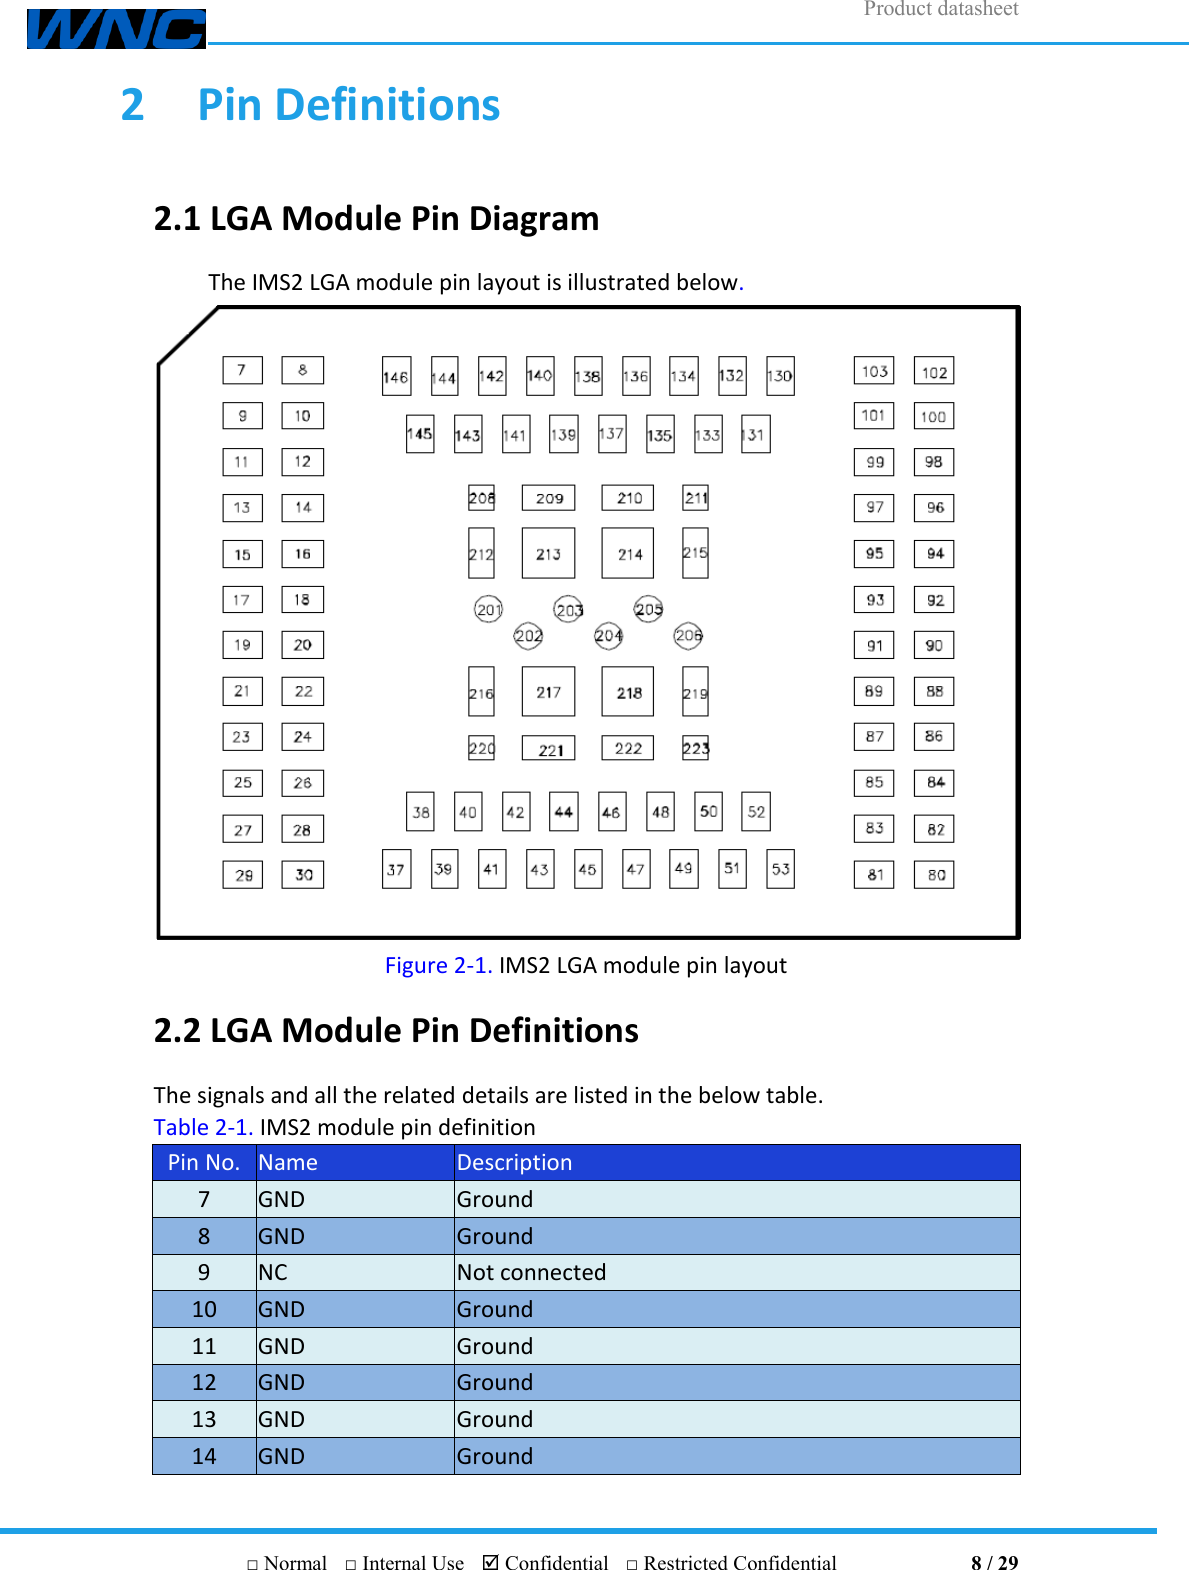 Product datasheet       □ Normal  □ Internal Use   Confidential  □ Restricted Confidential                                8 / 29 2  Pin Definitions 2.1 LGA Module Pin Diagram The IMS2 LGA module pin layout is illustrated below.  Figure 2-1. IMS2 LGA module pin layout 2.2 LGA Module Pin Definitions The signals and all the related details are listed in the below table. Table 2-1. IMS2 module pin definition Pin No. Name Description 7 GND Ground 8 GND Ground 9 NC Not connected 10 GND Ground 11 GND Ground 12 GND Ground 13 GND Ground 14 GND Ground 